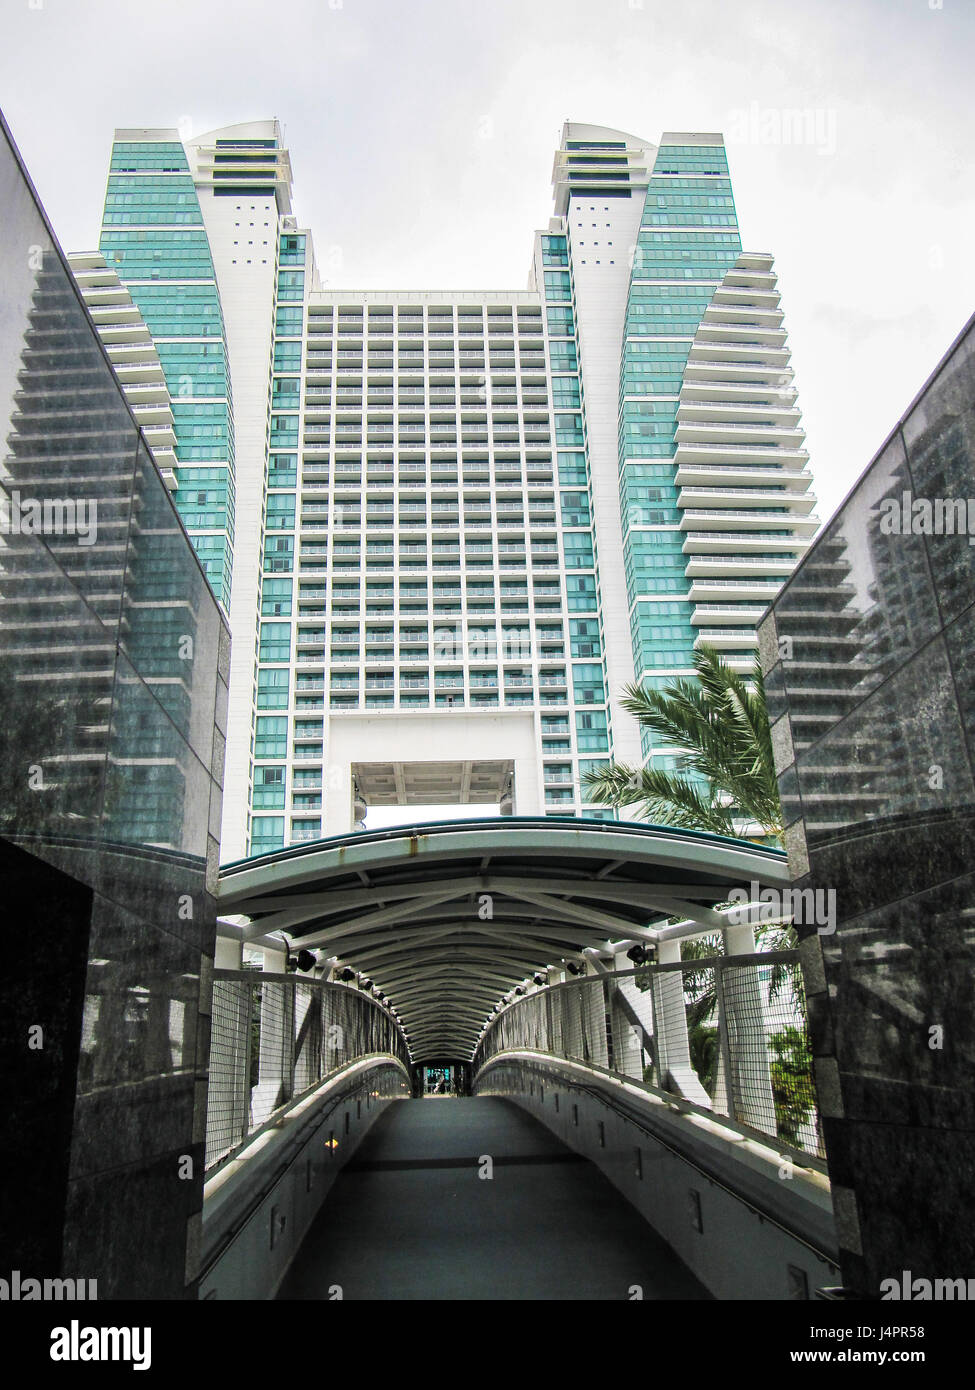 Hollywood, USA - June 15, 2012: Diplomat resort oceanfront hotel with bridge in Florida by Miami beach Stock Photo